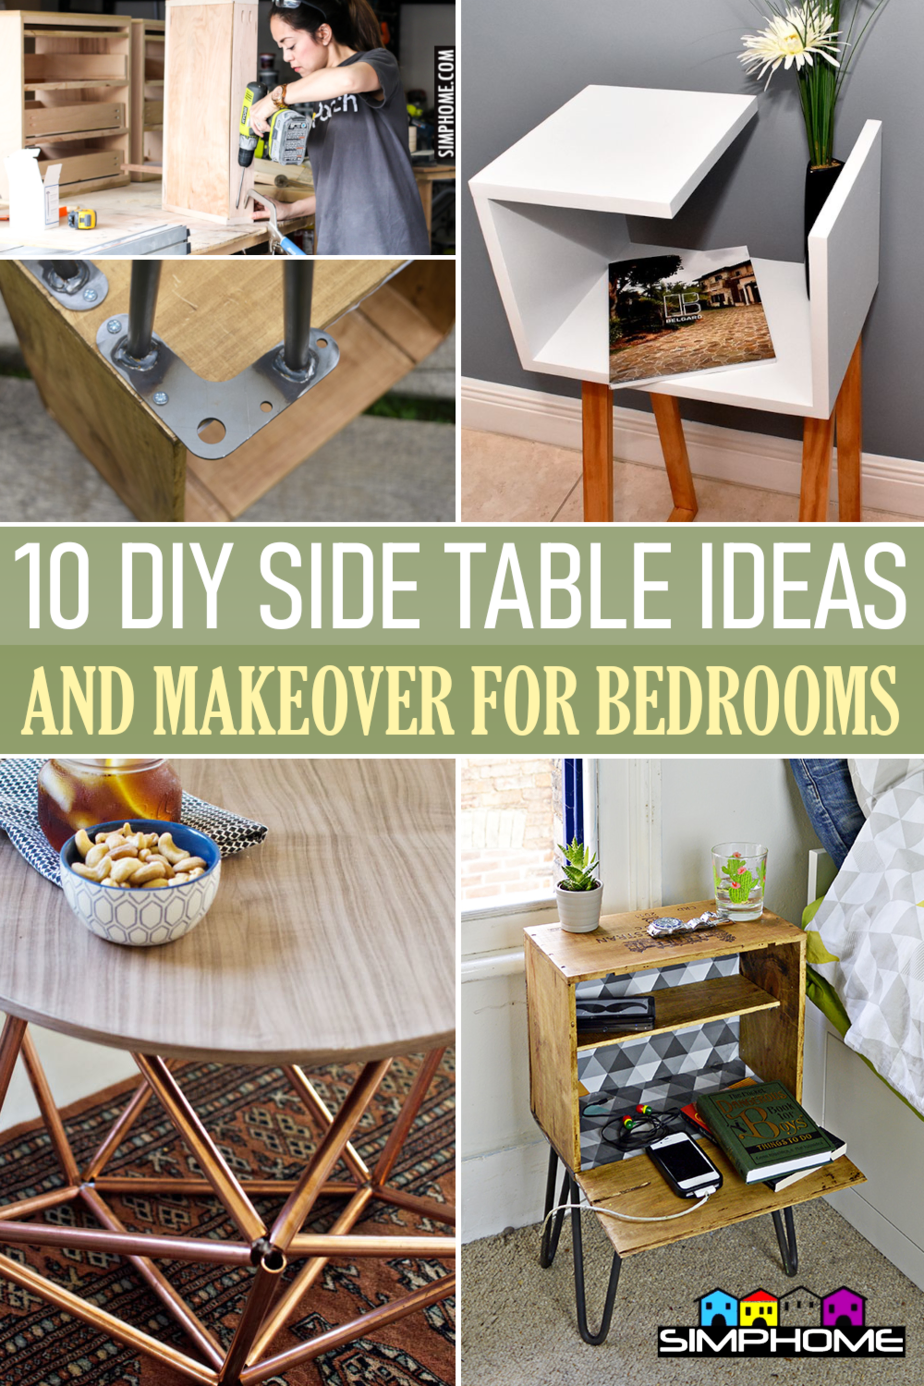 10 DIY Side Table for Bedroom Ideas via Simphome.comFeatured Image